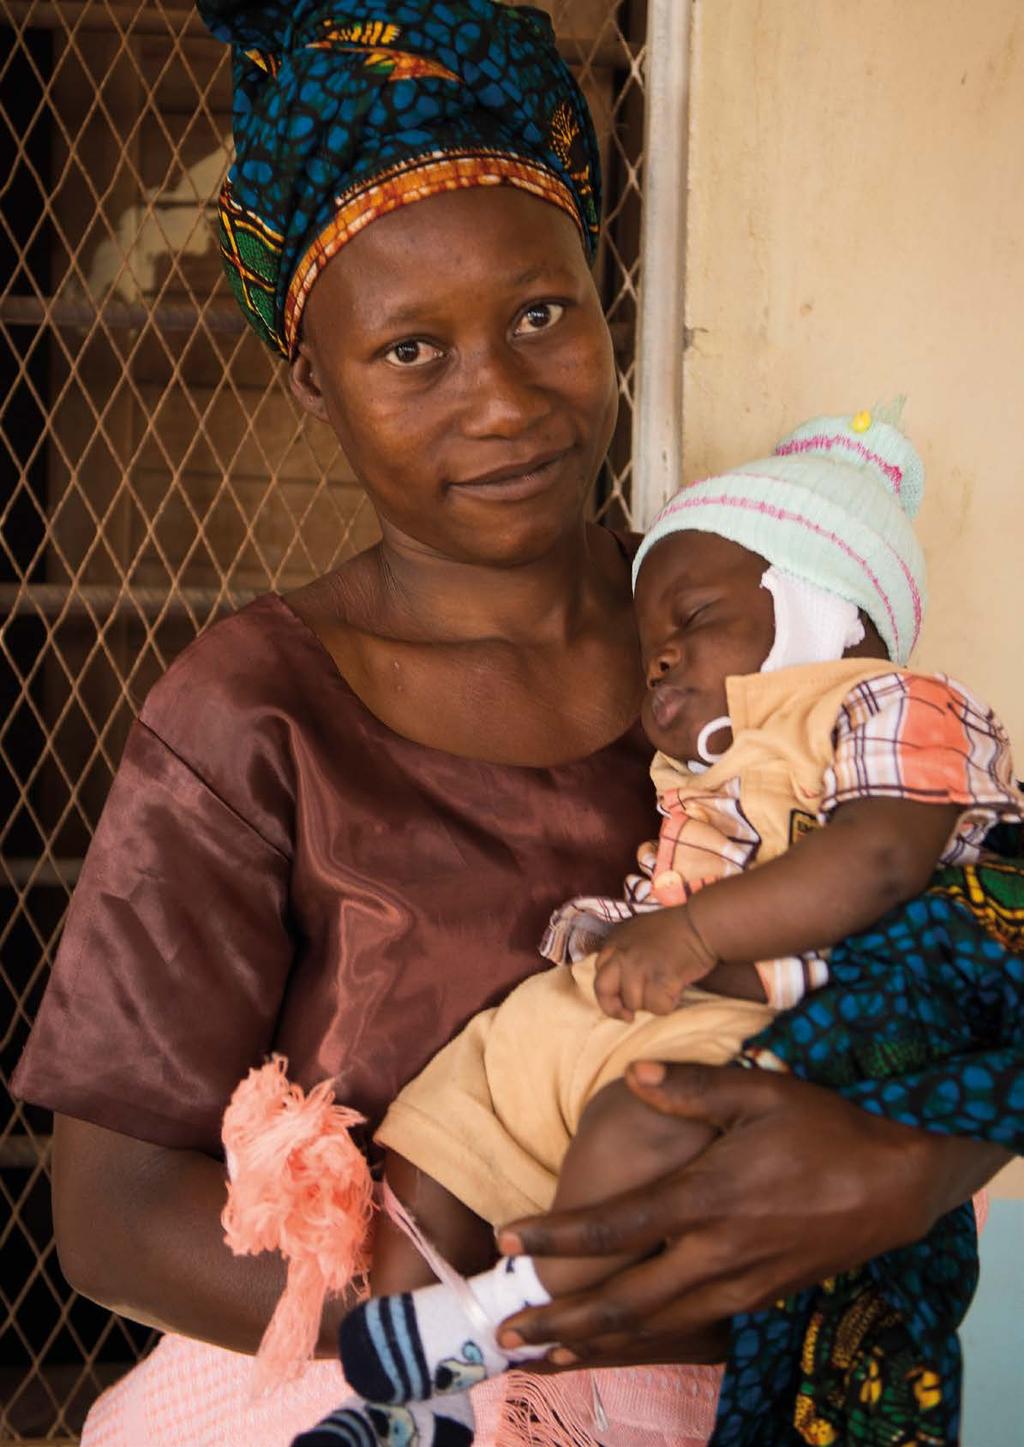 32-year-old Flora holds her young son, Melckezedek, as she attends the post-natal health clinic